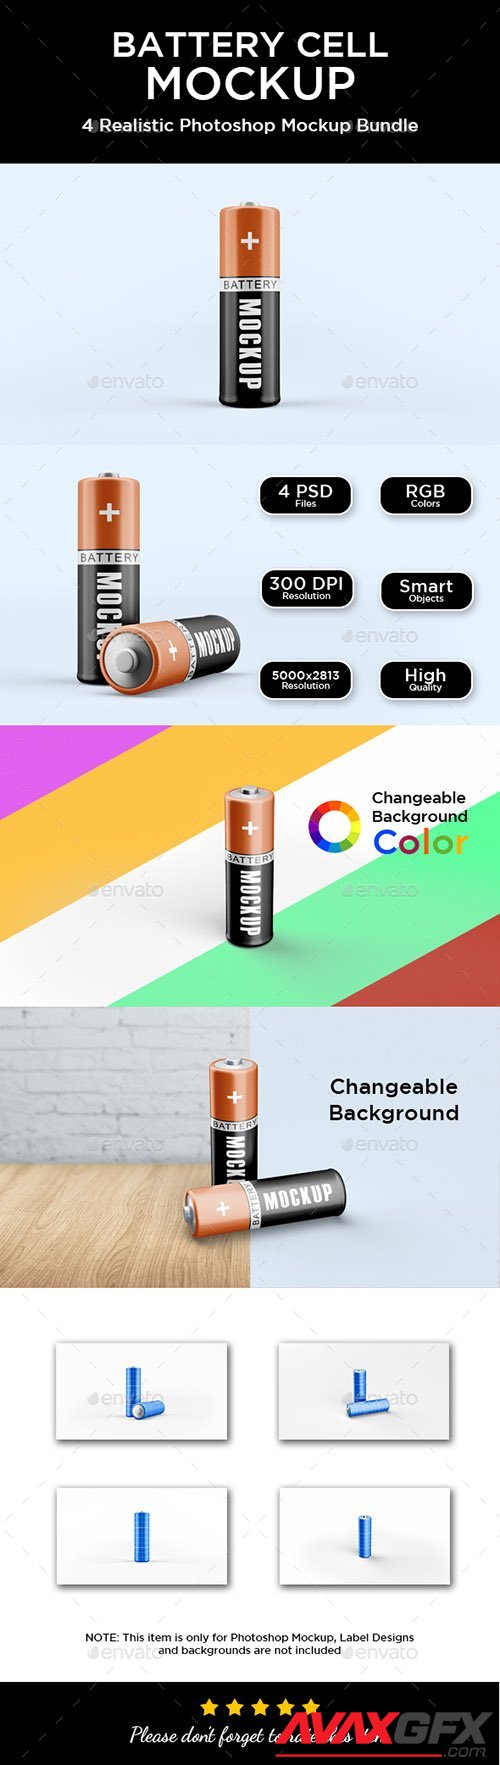 Graphicriver - Battery Cell Mockup 21399443